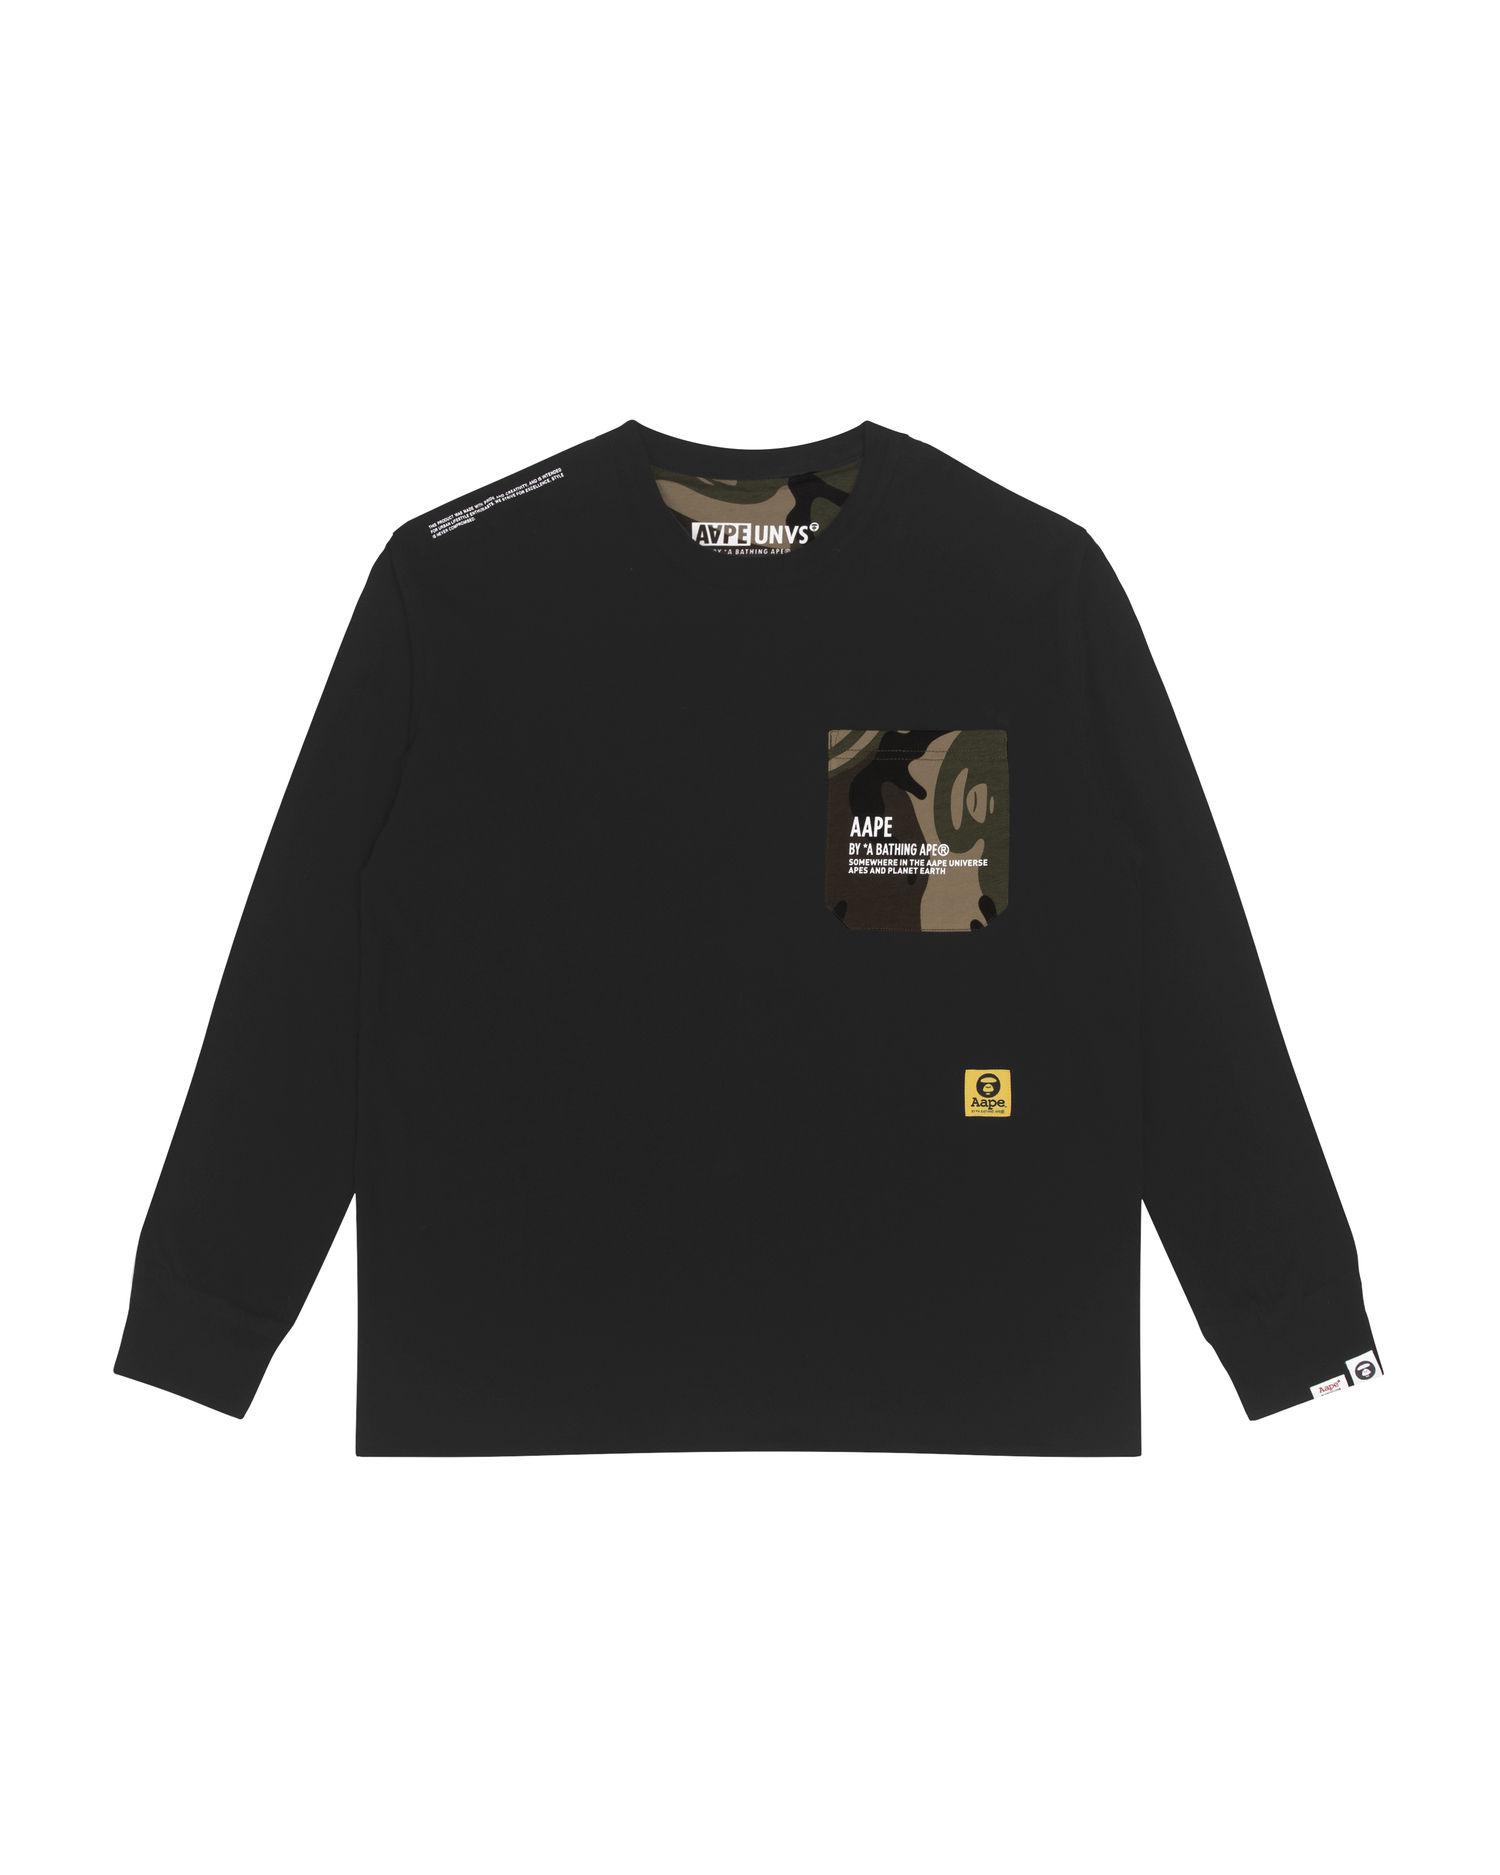 Moonface reversible camo L/S tee by AAPE